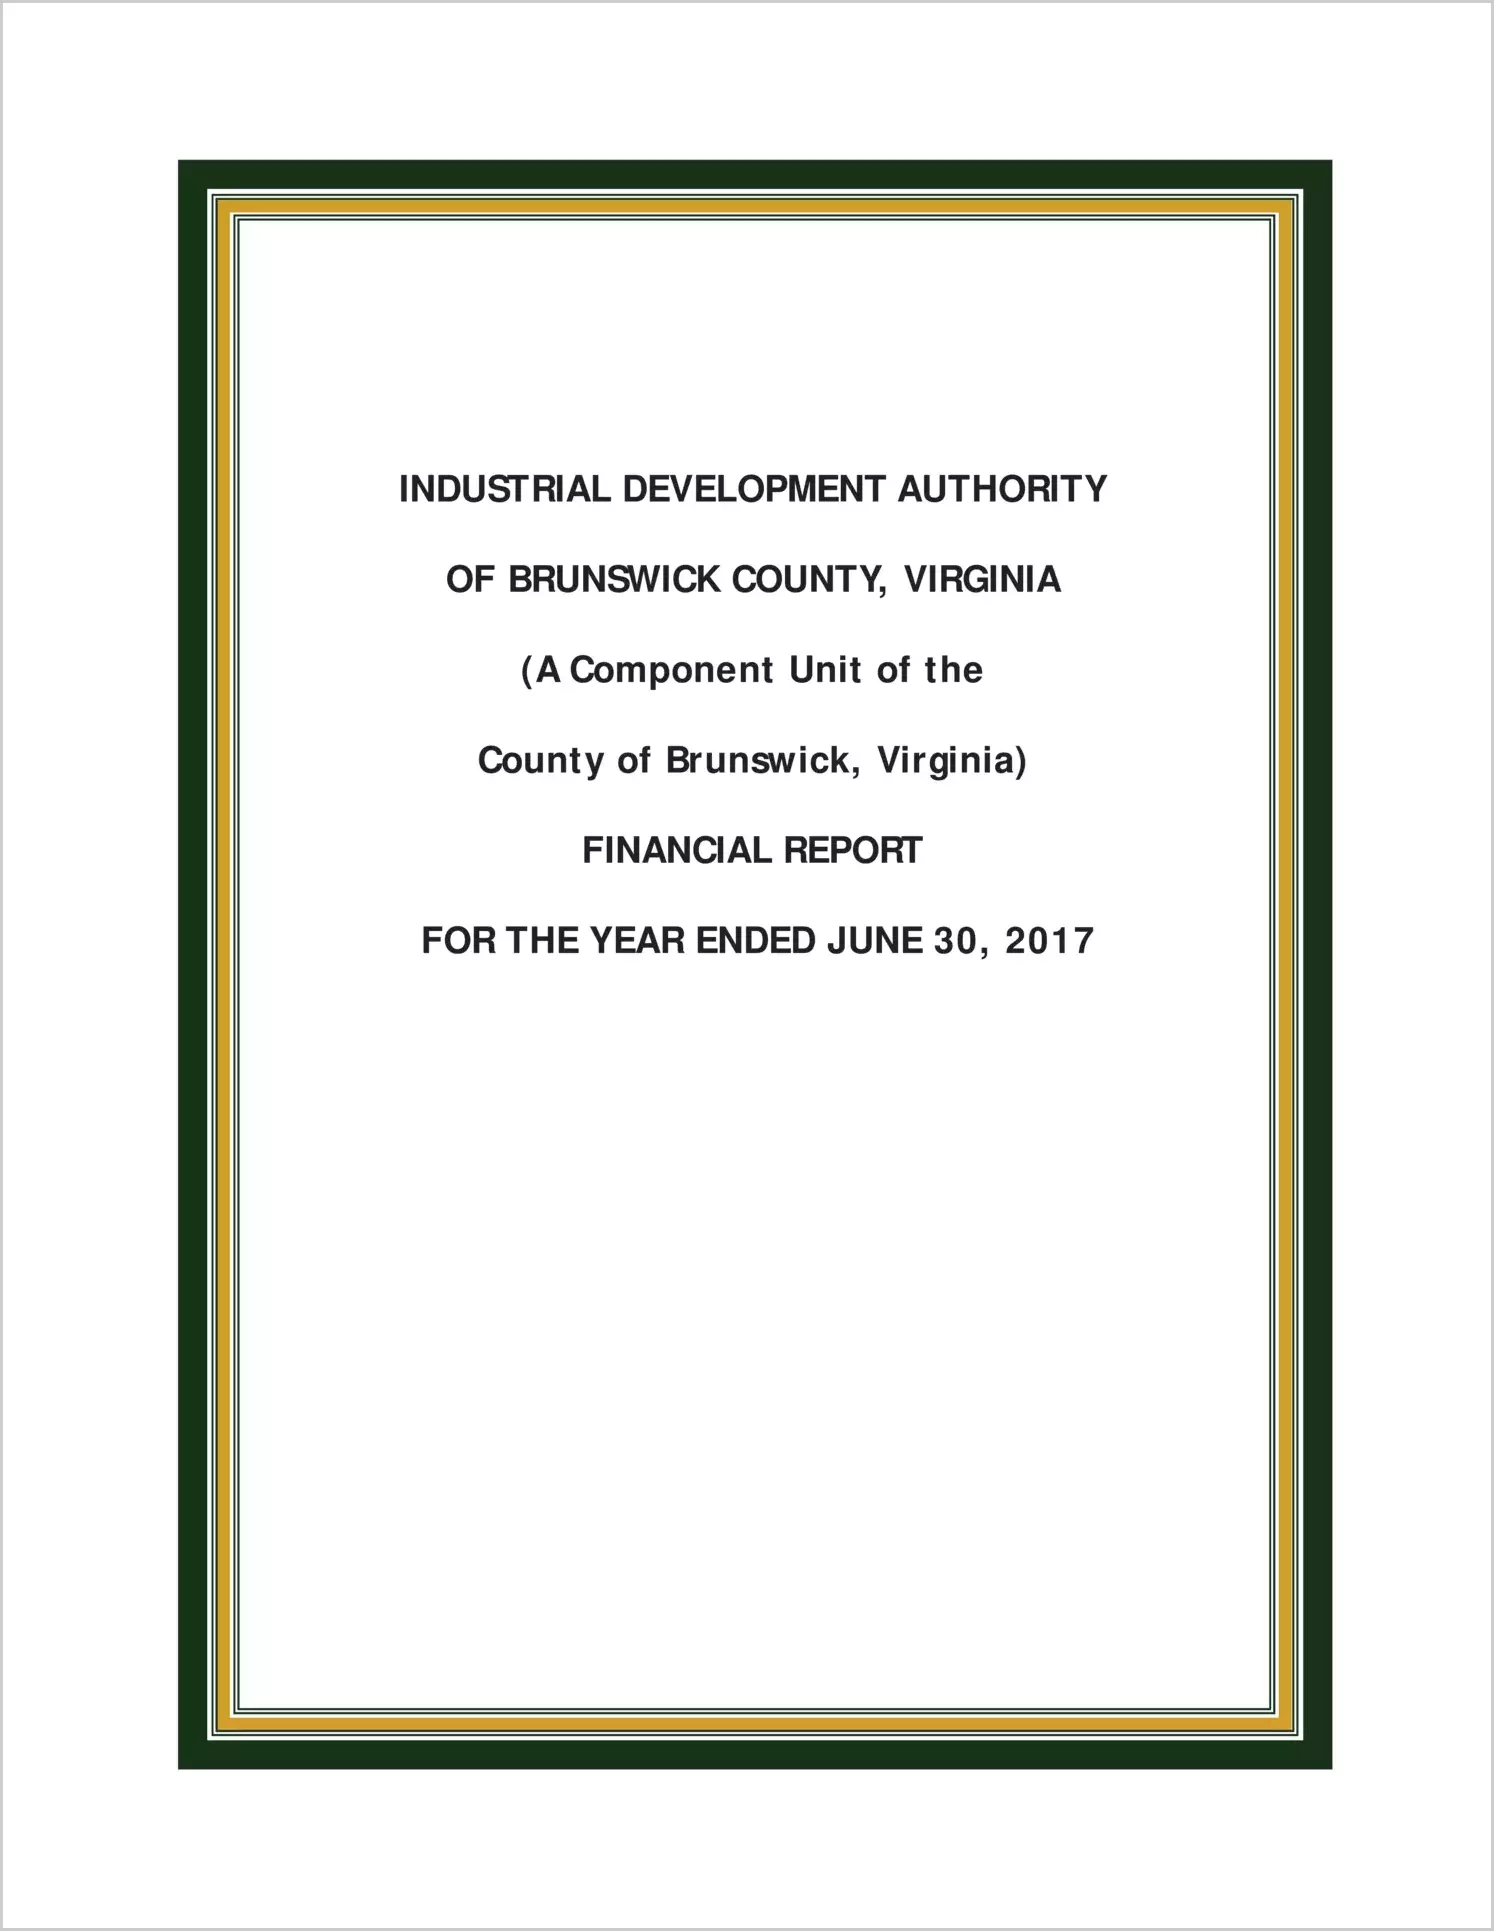 2017 ABC/Other Annual Financial Report  for Brunswick Industrial Development Authority